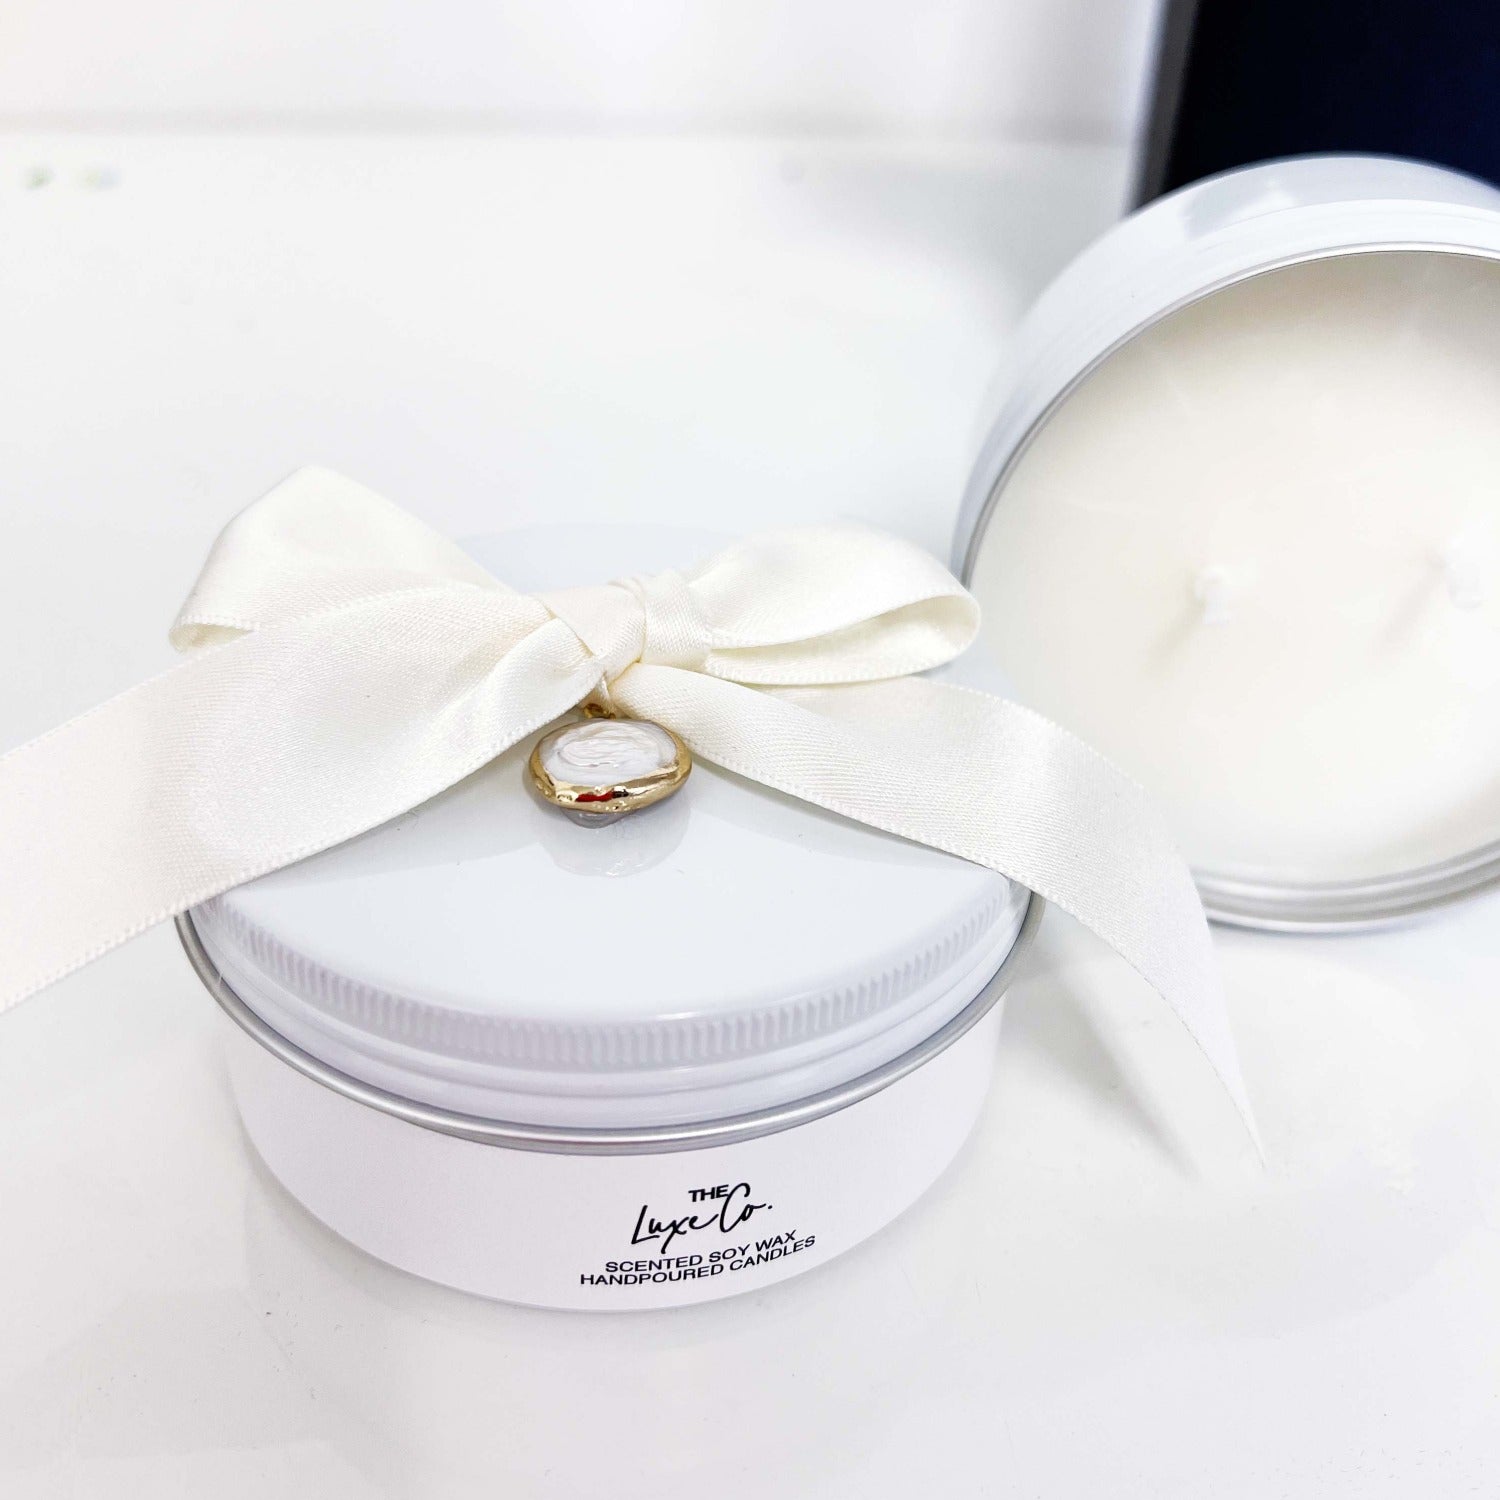 Natural pearl scented soy wax candle gift